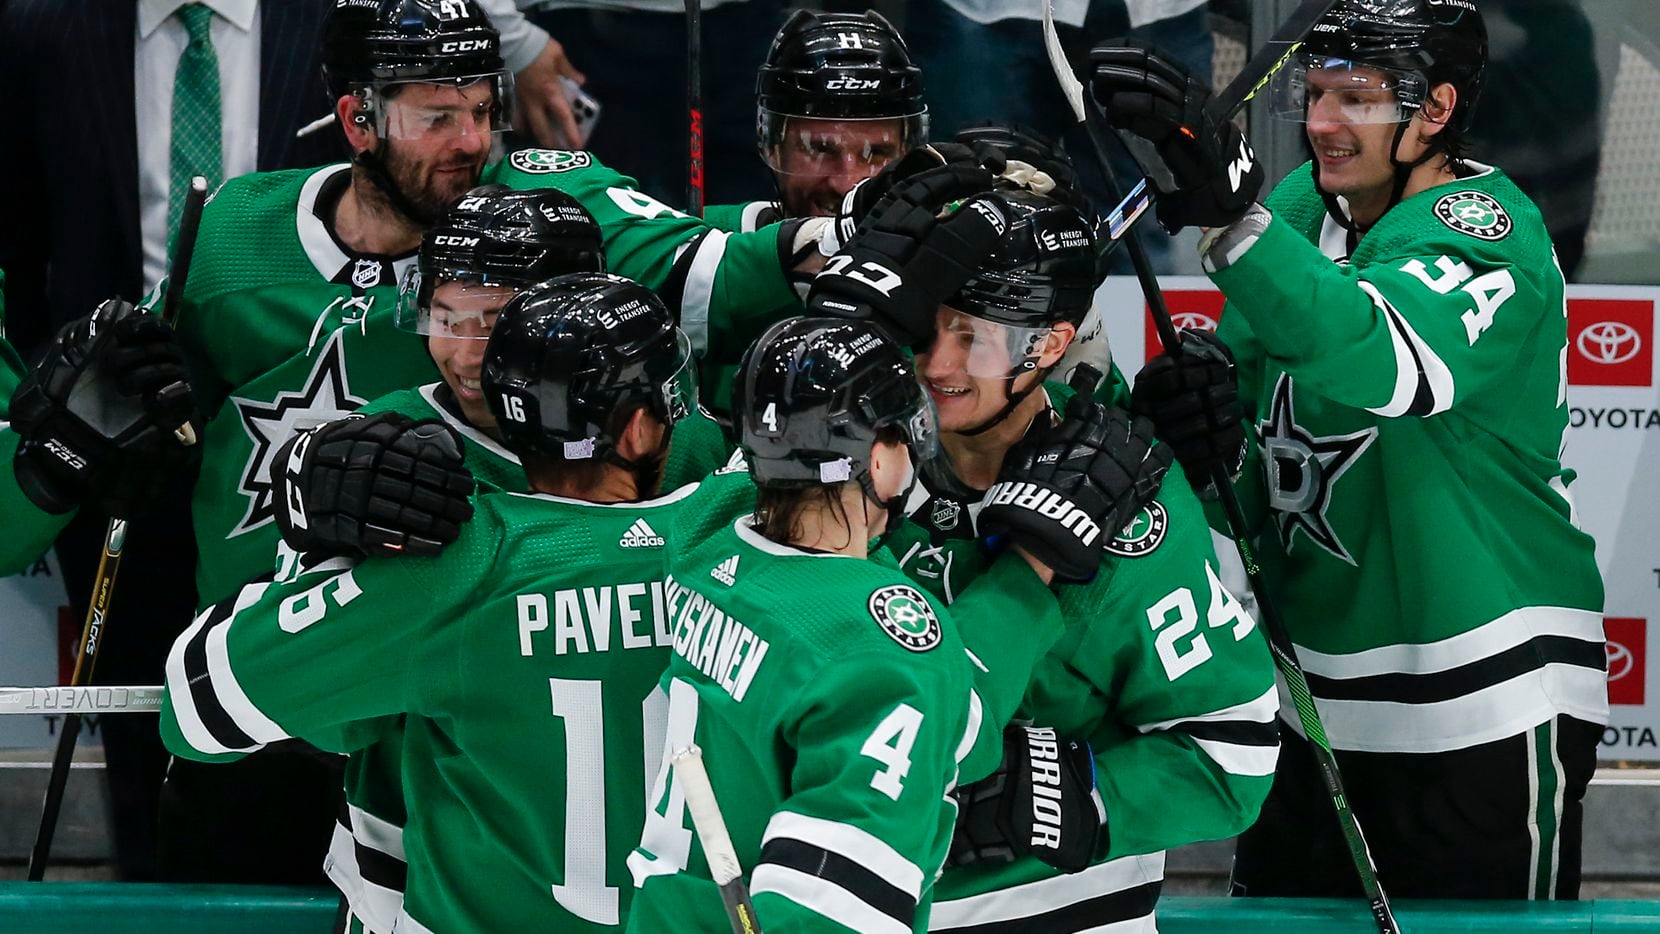 Dallas Stars forward Roope Hintz (24) is congratulated by teammates after scoring an empty net goal, for the hat trick, during the third period of an NHL hockey game against the Carolina Hurricanes in Dallas, Tuesday, November 30, 2021. Dallas won 4-1.